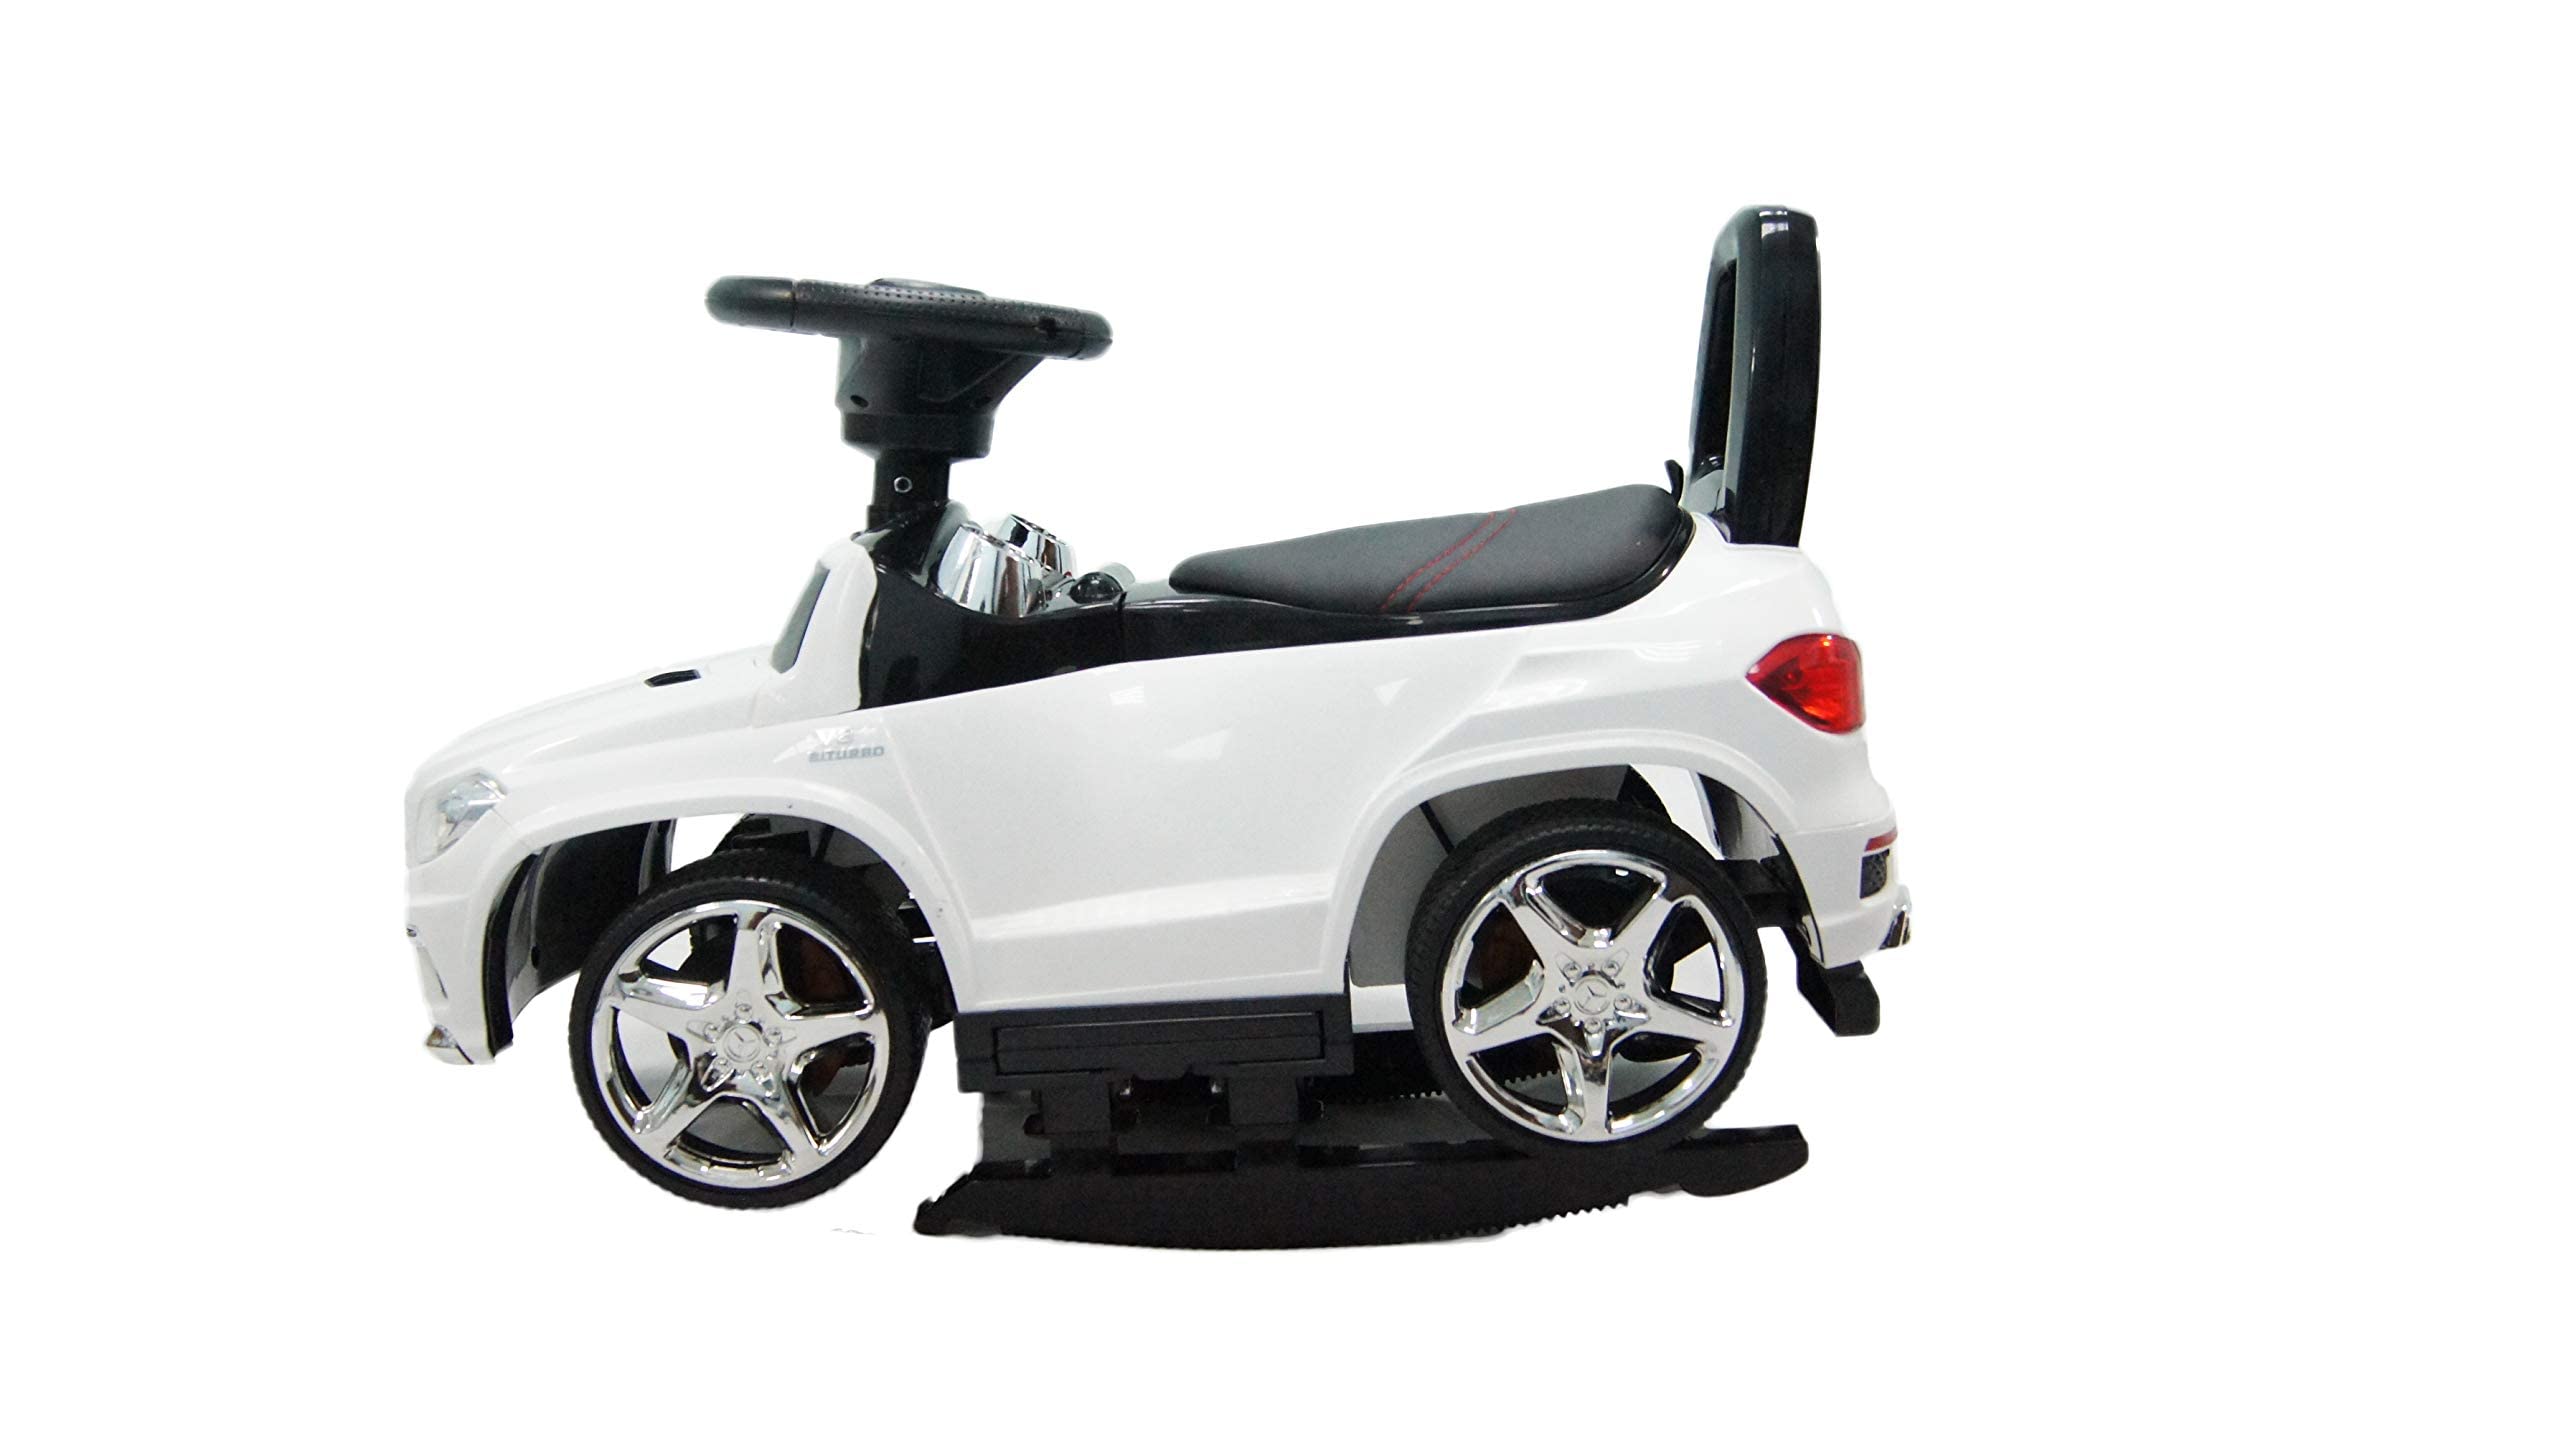 Best Ride On Cars 4 in 1 Mercedes Battery Powered Push Car, White